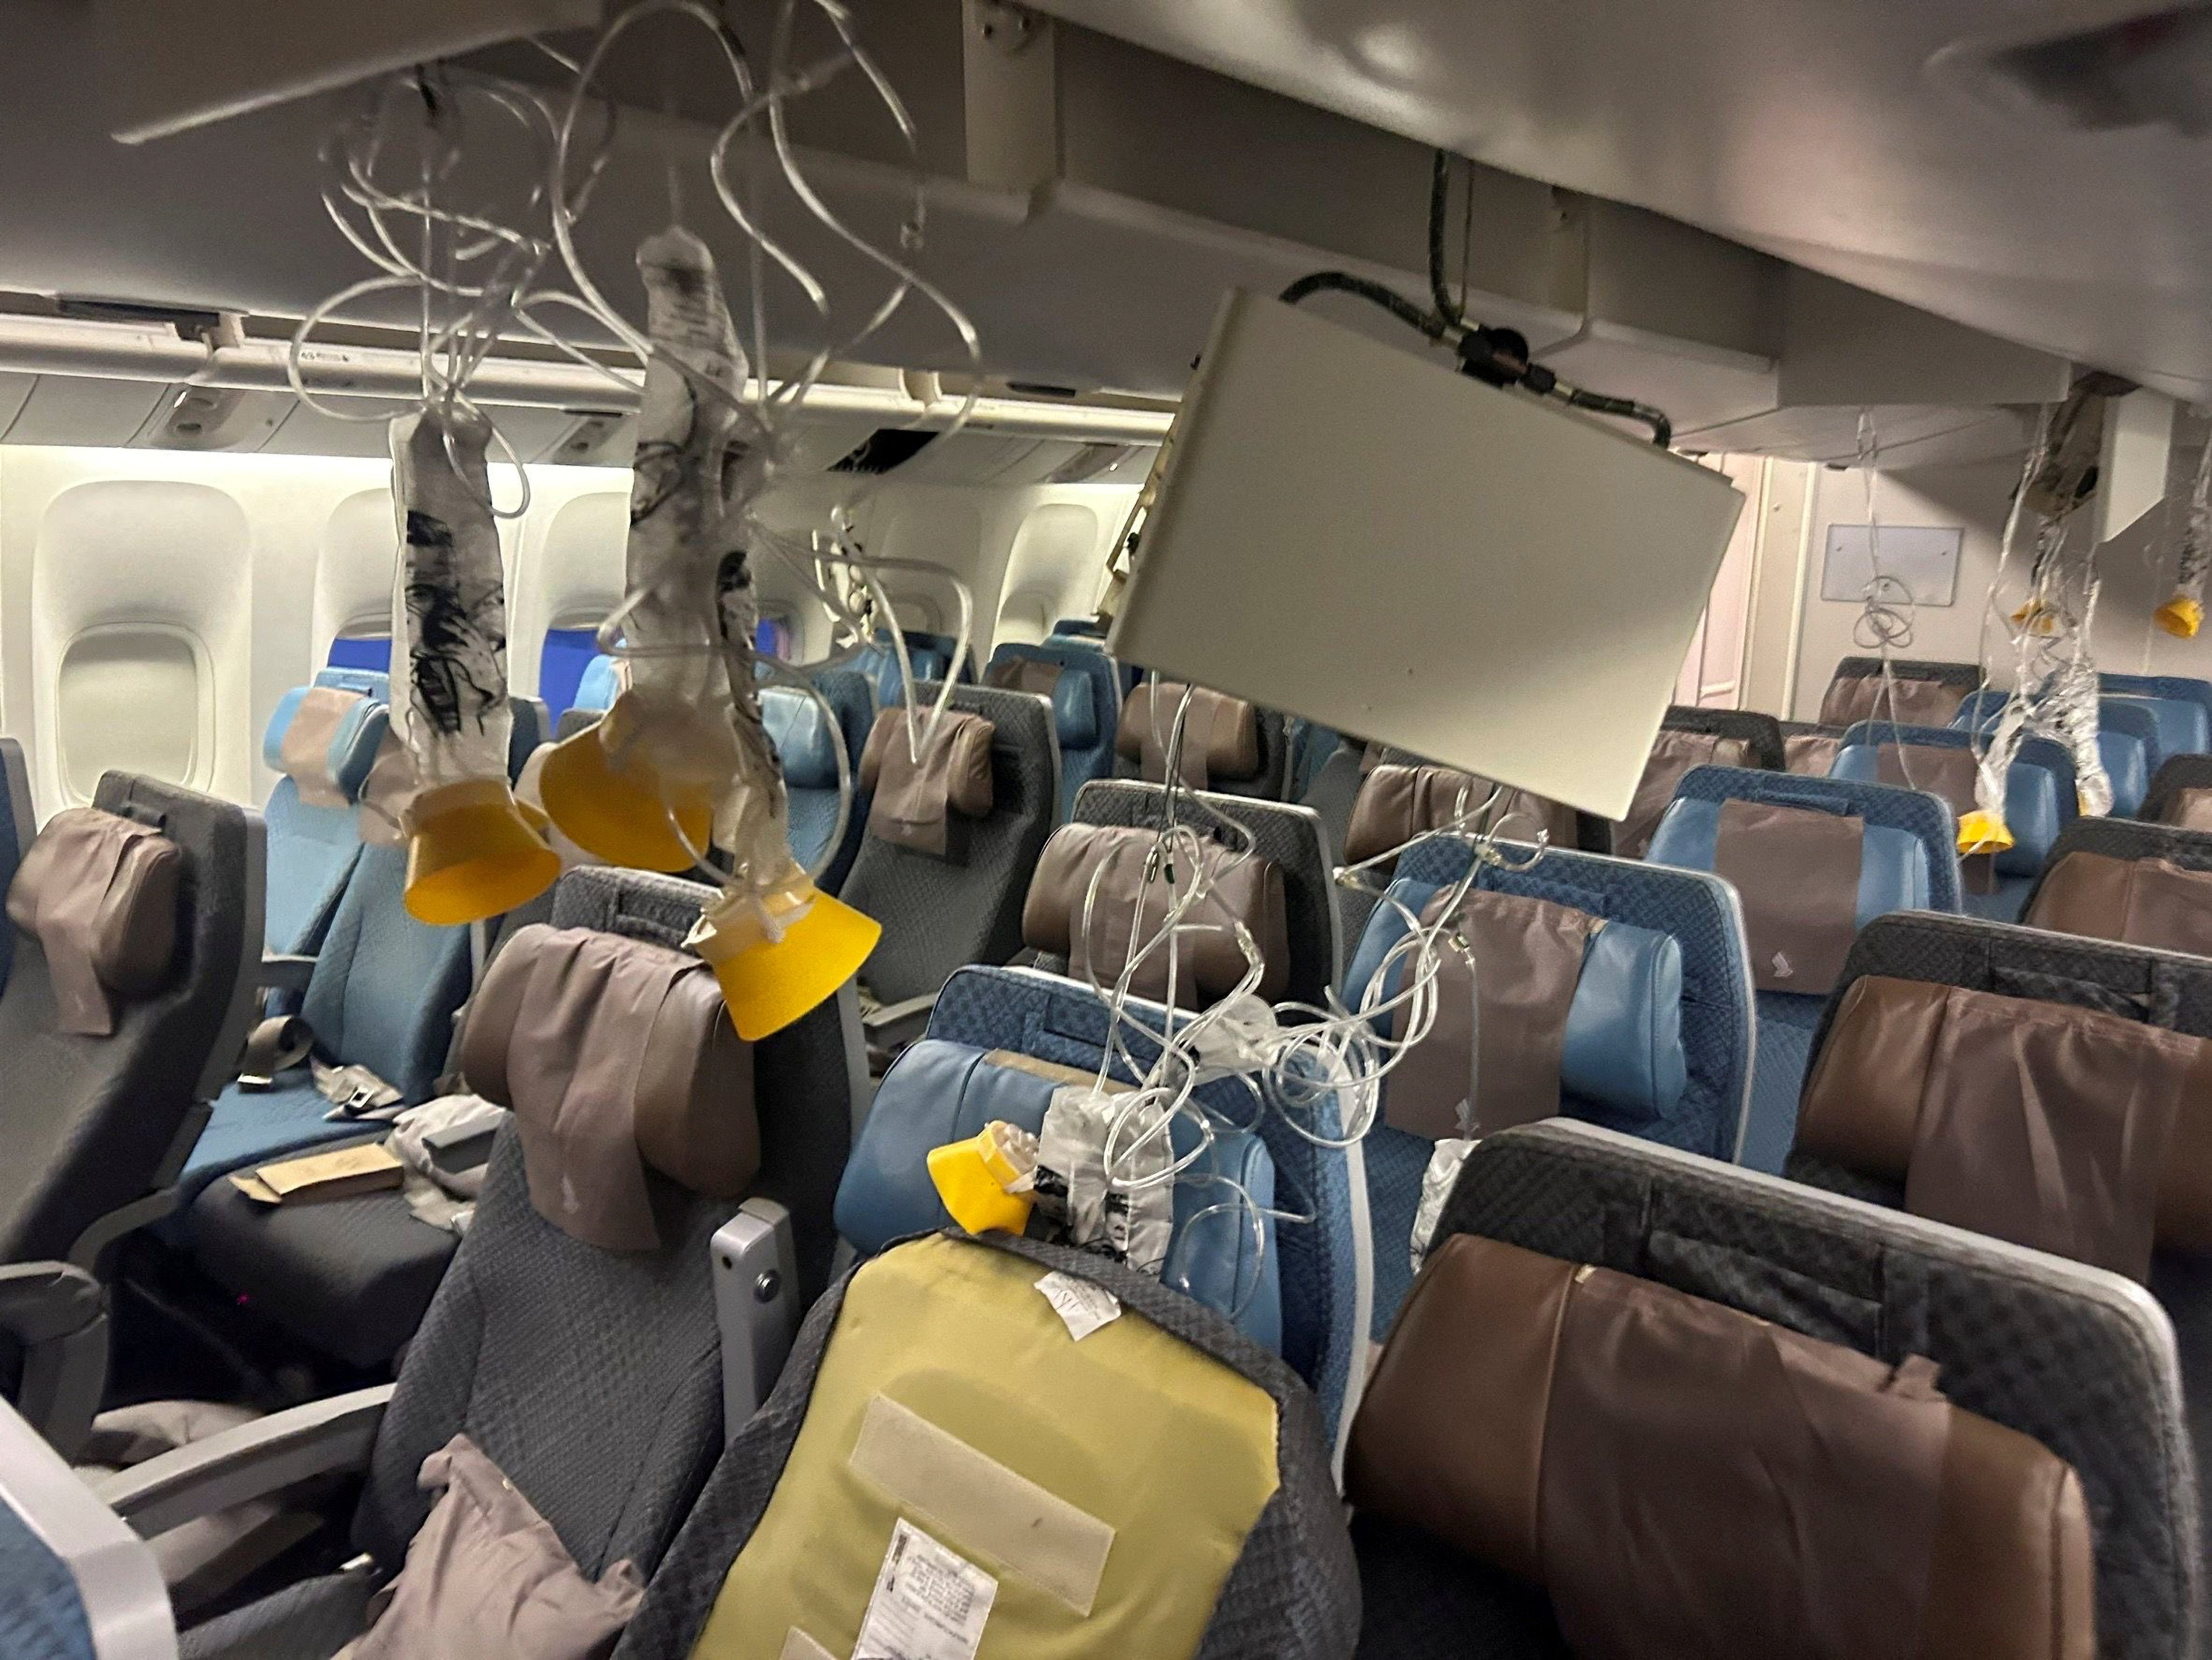 The interior of Singapore Airlines flight SQ321 after it landed at Bangkok in Thailand following severe turbulence that left a British man dead and several others hurt. Photo: Reuters